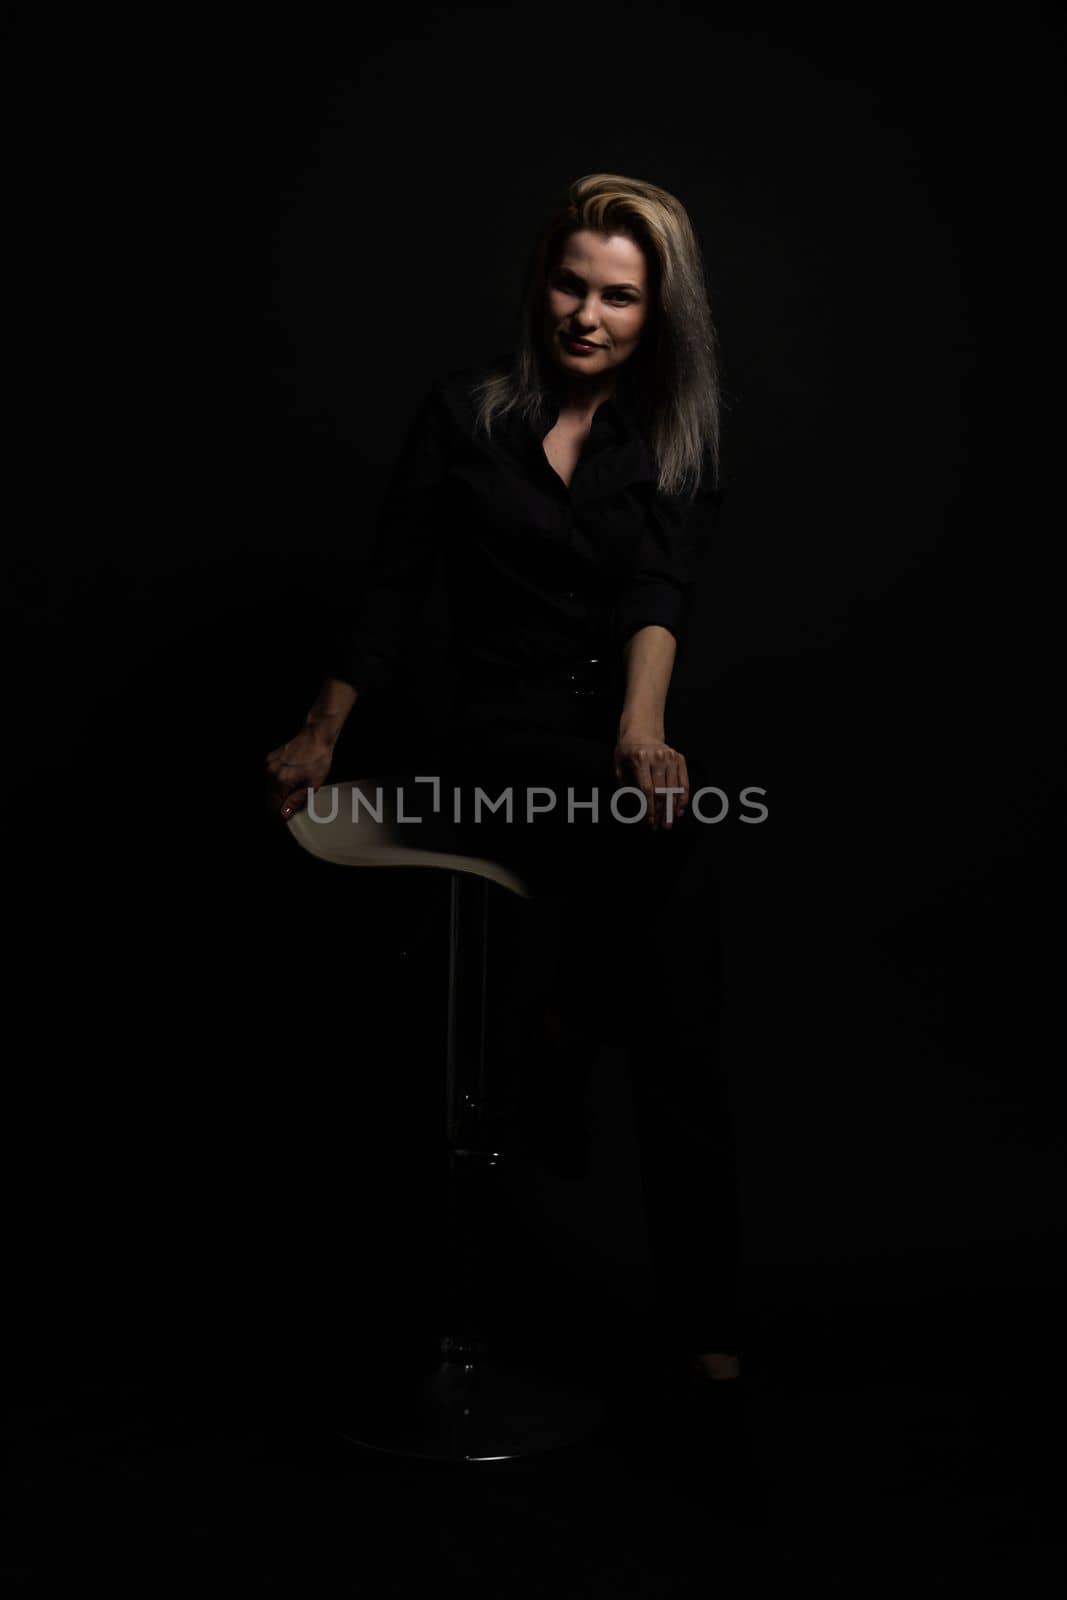 woman in black on a black background by Andelov13